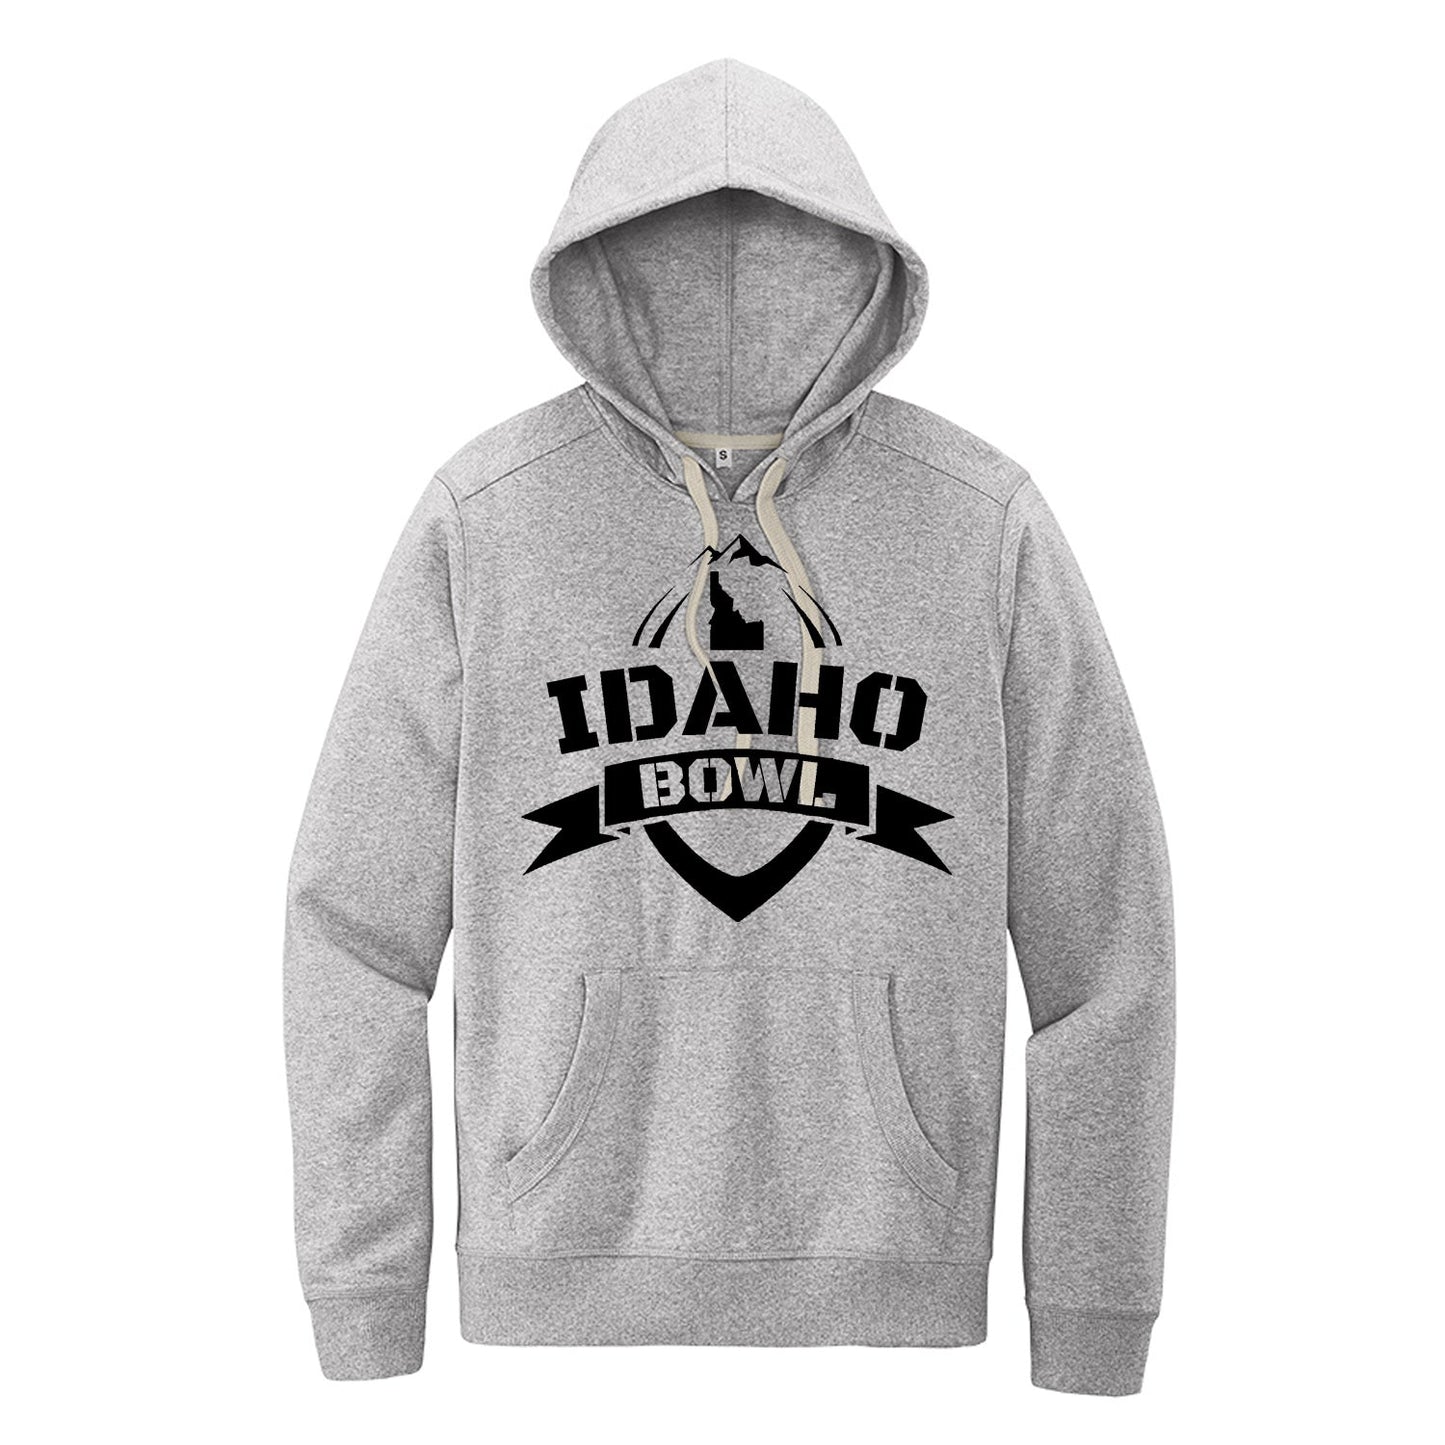 Idaho Bowl YOUTH  - Fleece Hoodie - 2 colors available